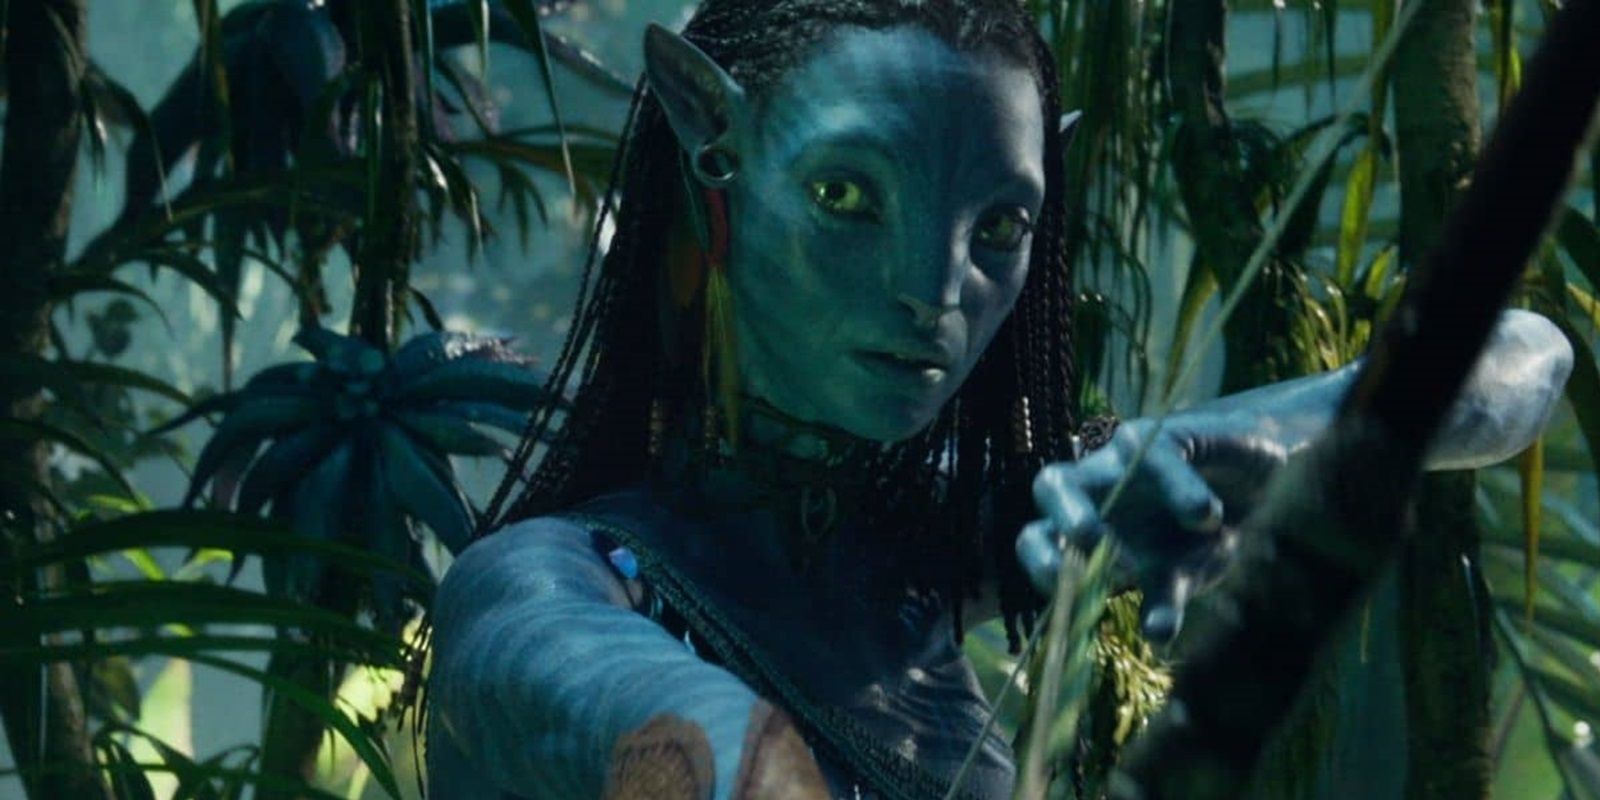 Neytiri with a bow and arrow in Avatar The Way of Water